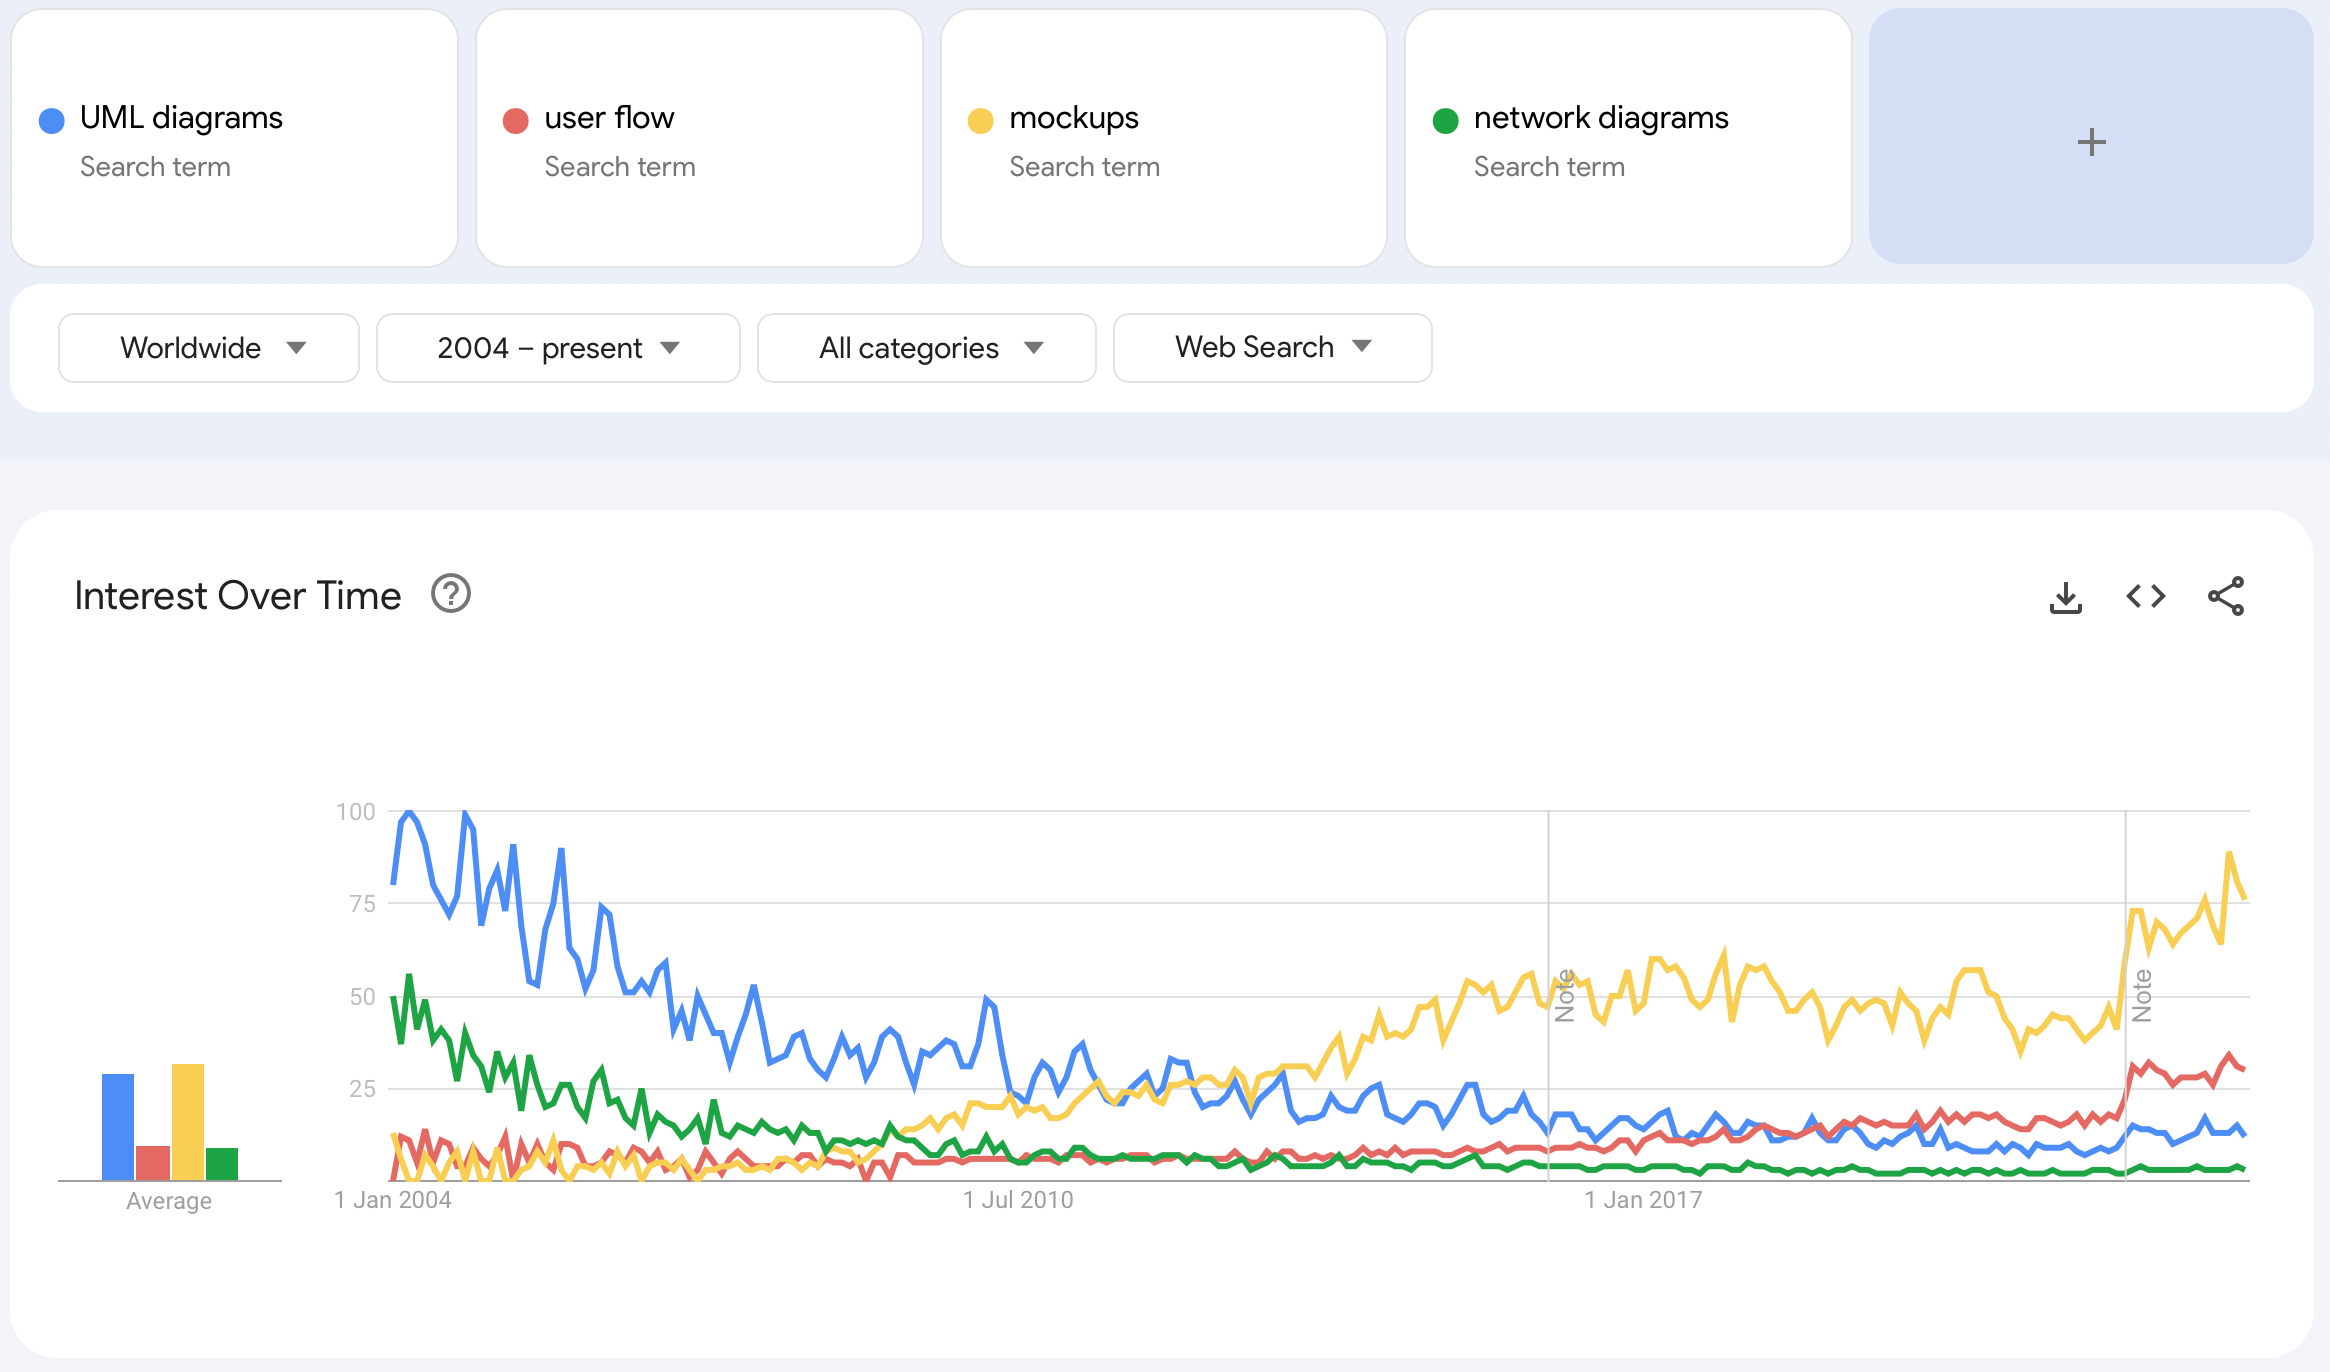 While UML and network diagrams are less often searched for, mockups and user flows are becoming more popular